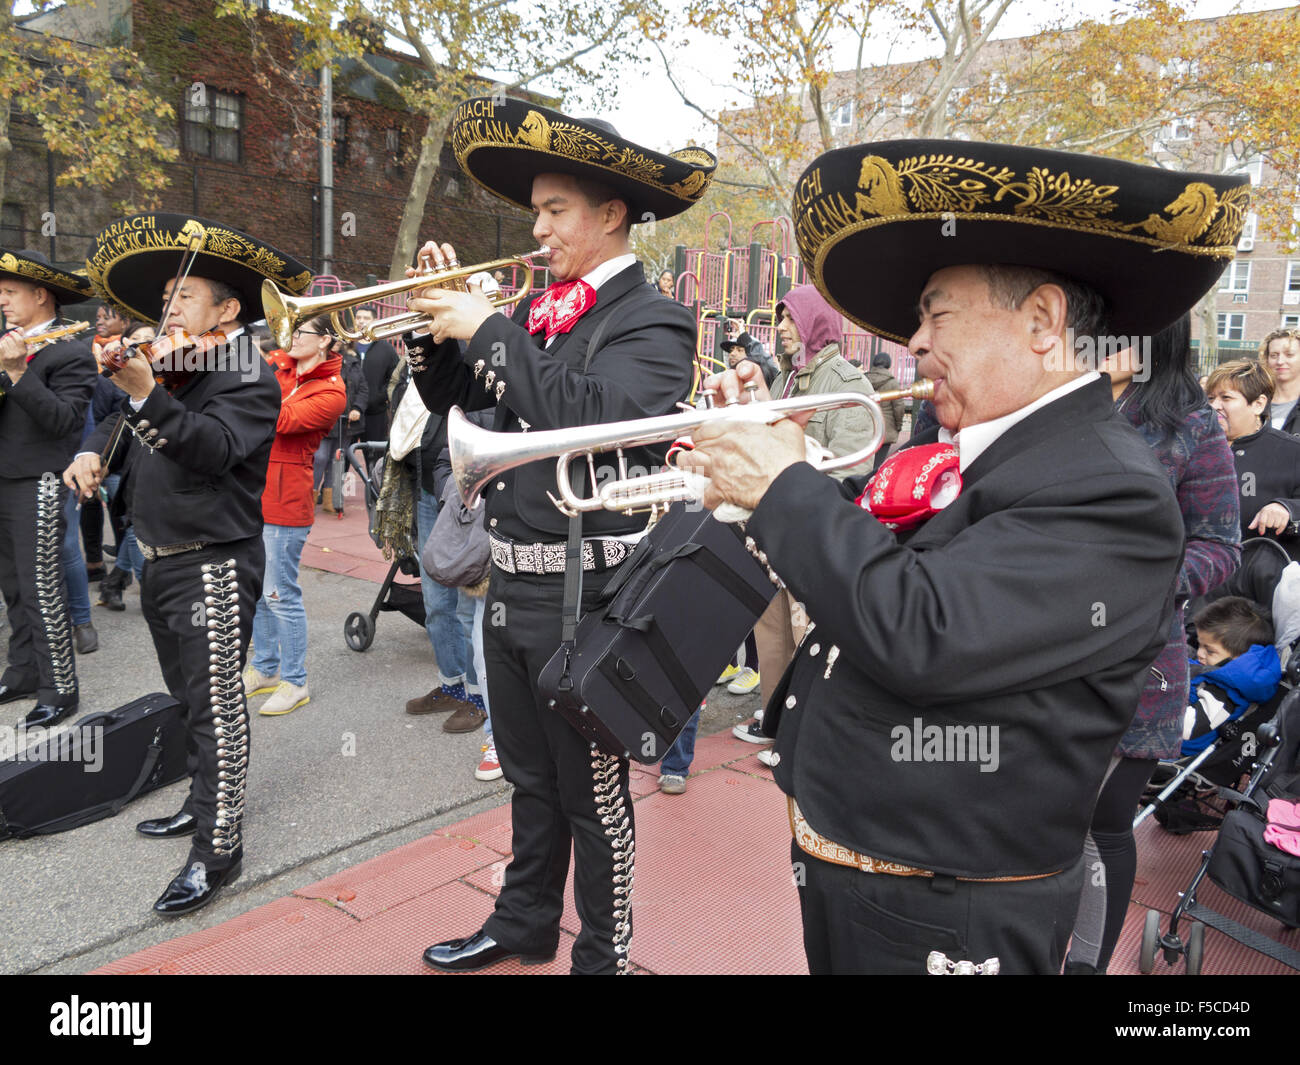 Mariachi players at Day of the Dead Festival in the Kensington section of Brooklyn, NY, Nov.1, 2015. Stock Photo